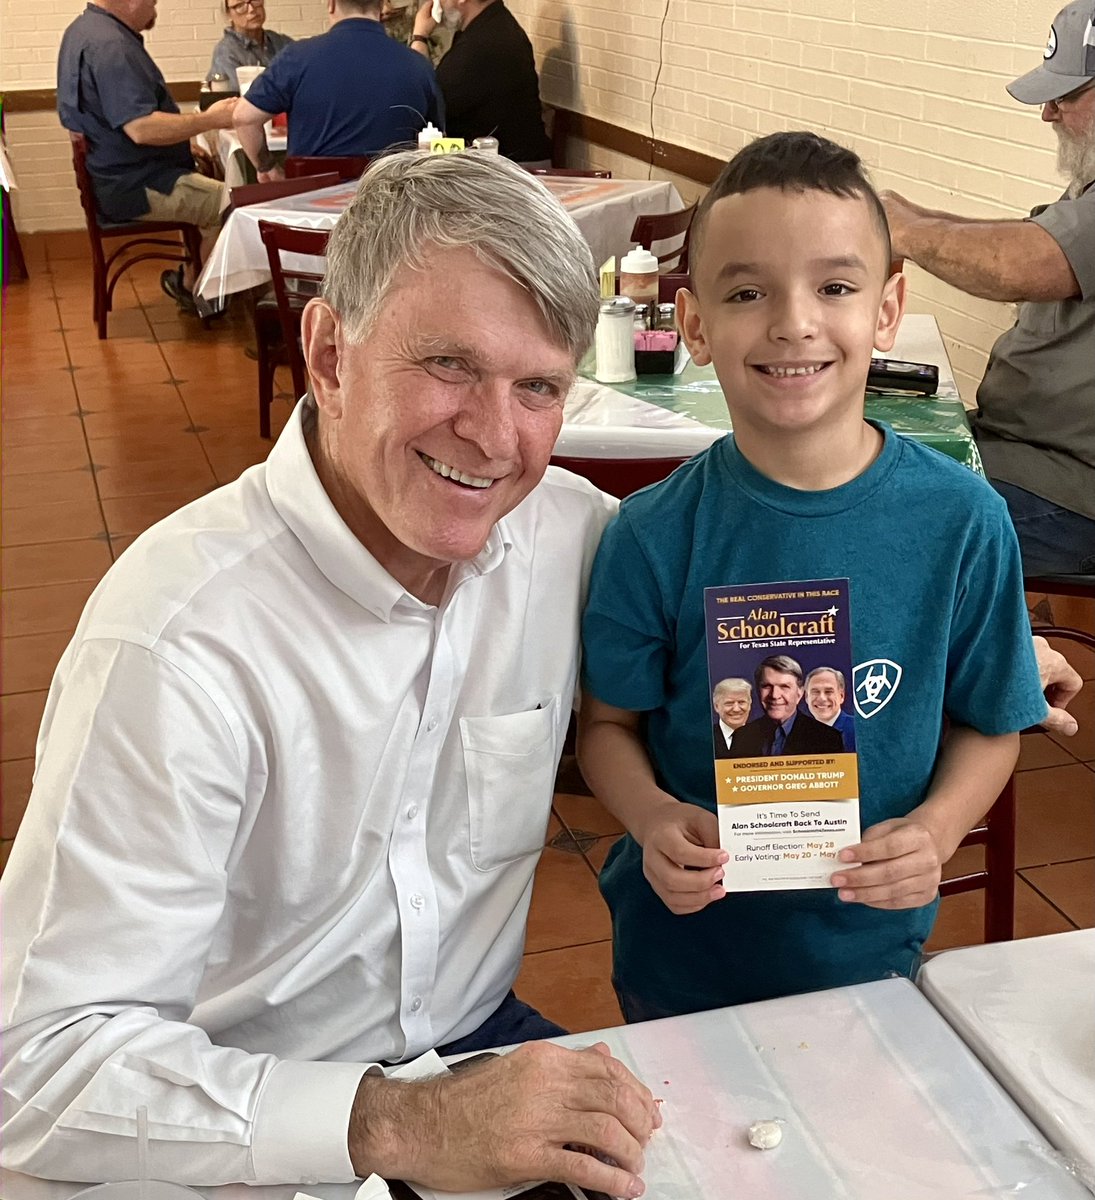 Out on the campaign trail in #HD44 today. Meet Dalan, my youngest supporter!